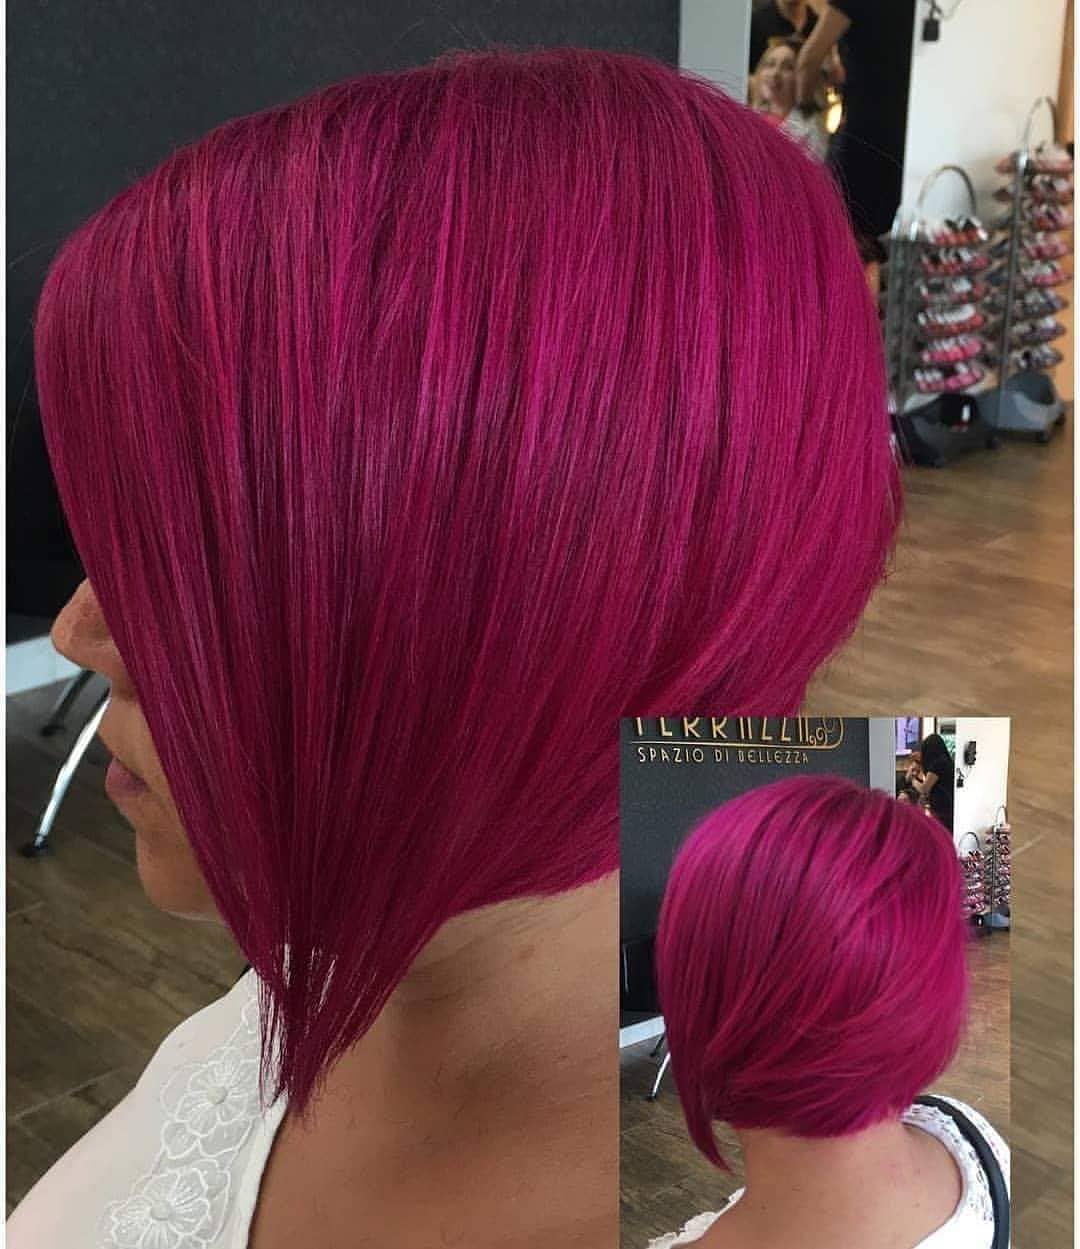 1675595664 531 Short and cheeky bob hairstyles the new trends for - Short and cheeky bob hairstyles - the new trends for 2023